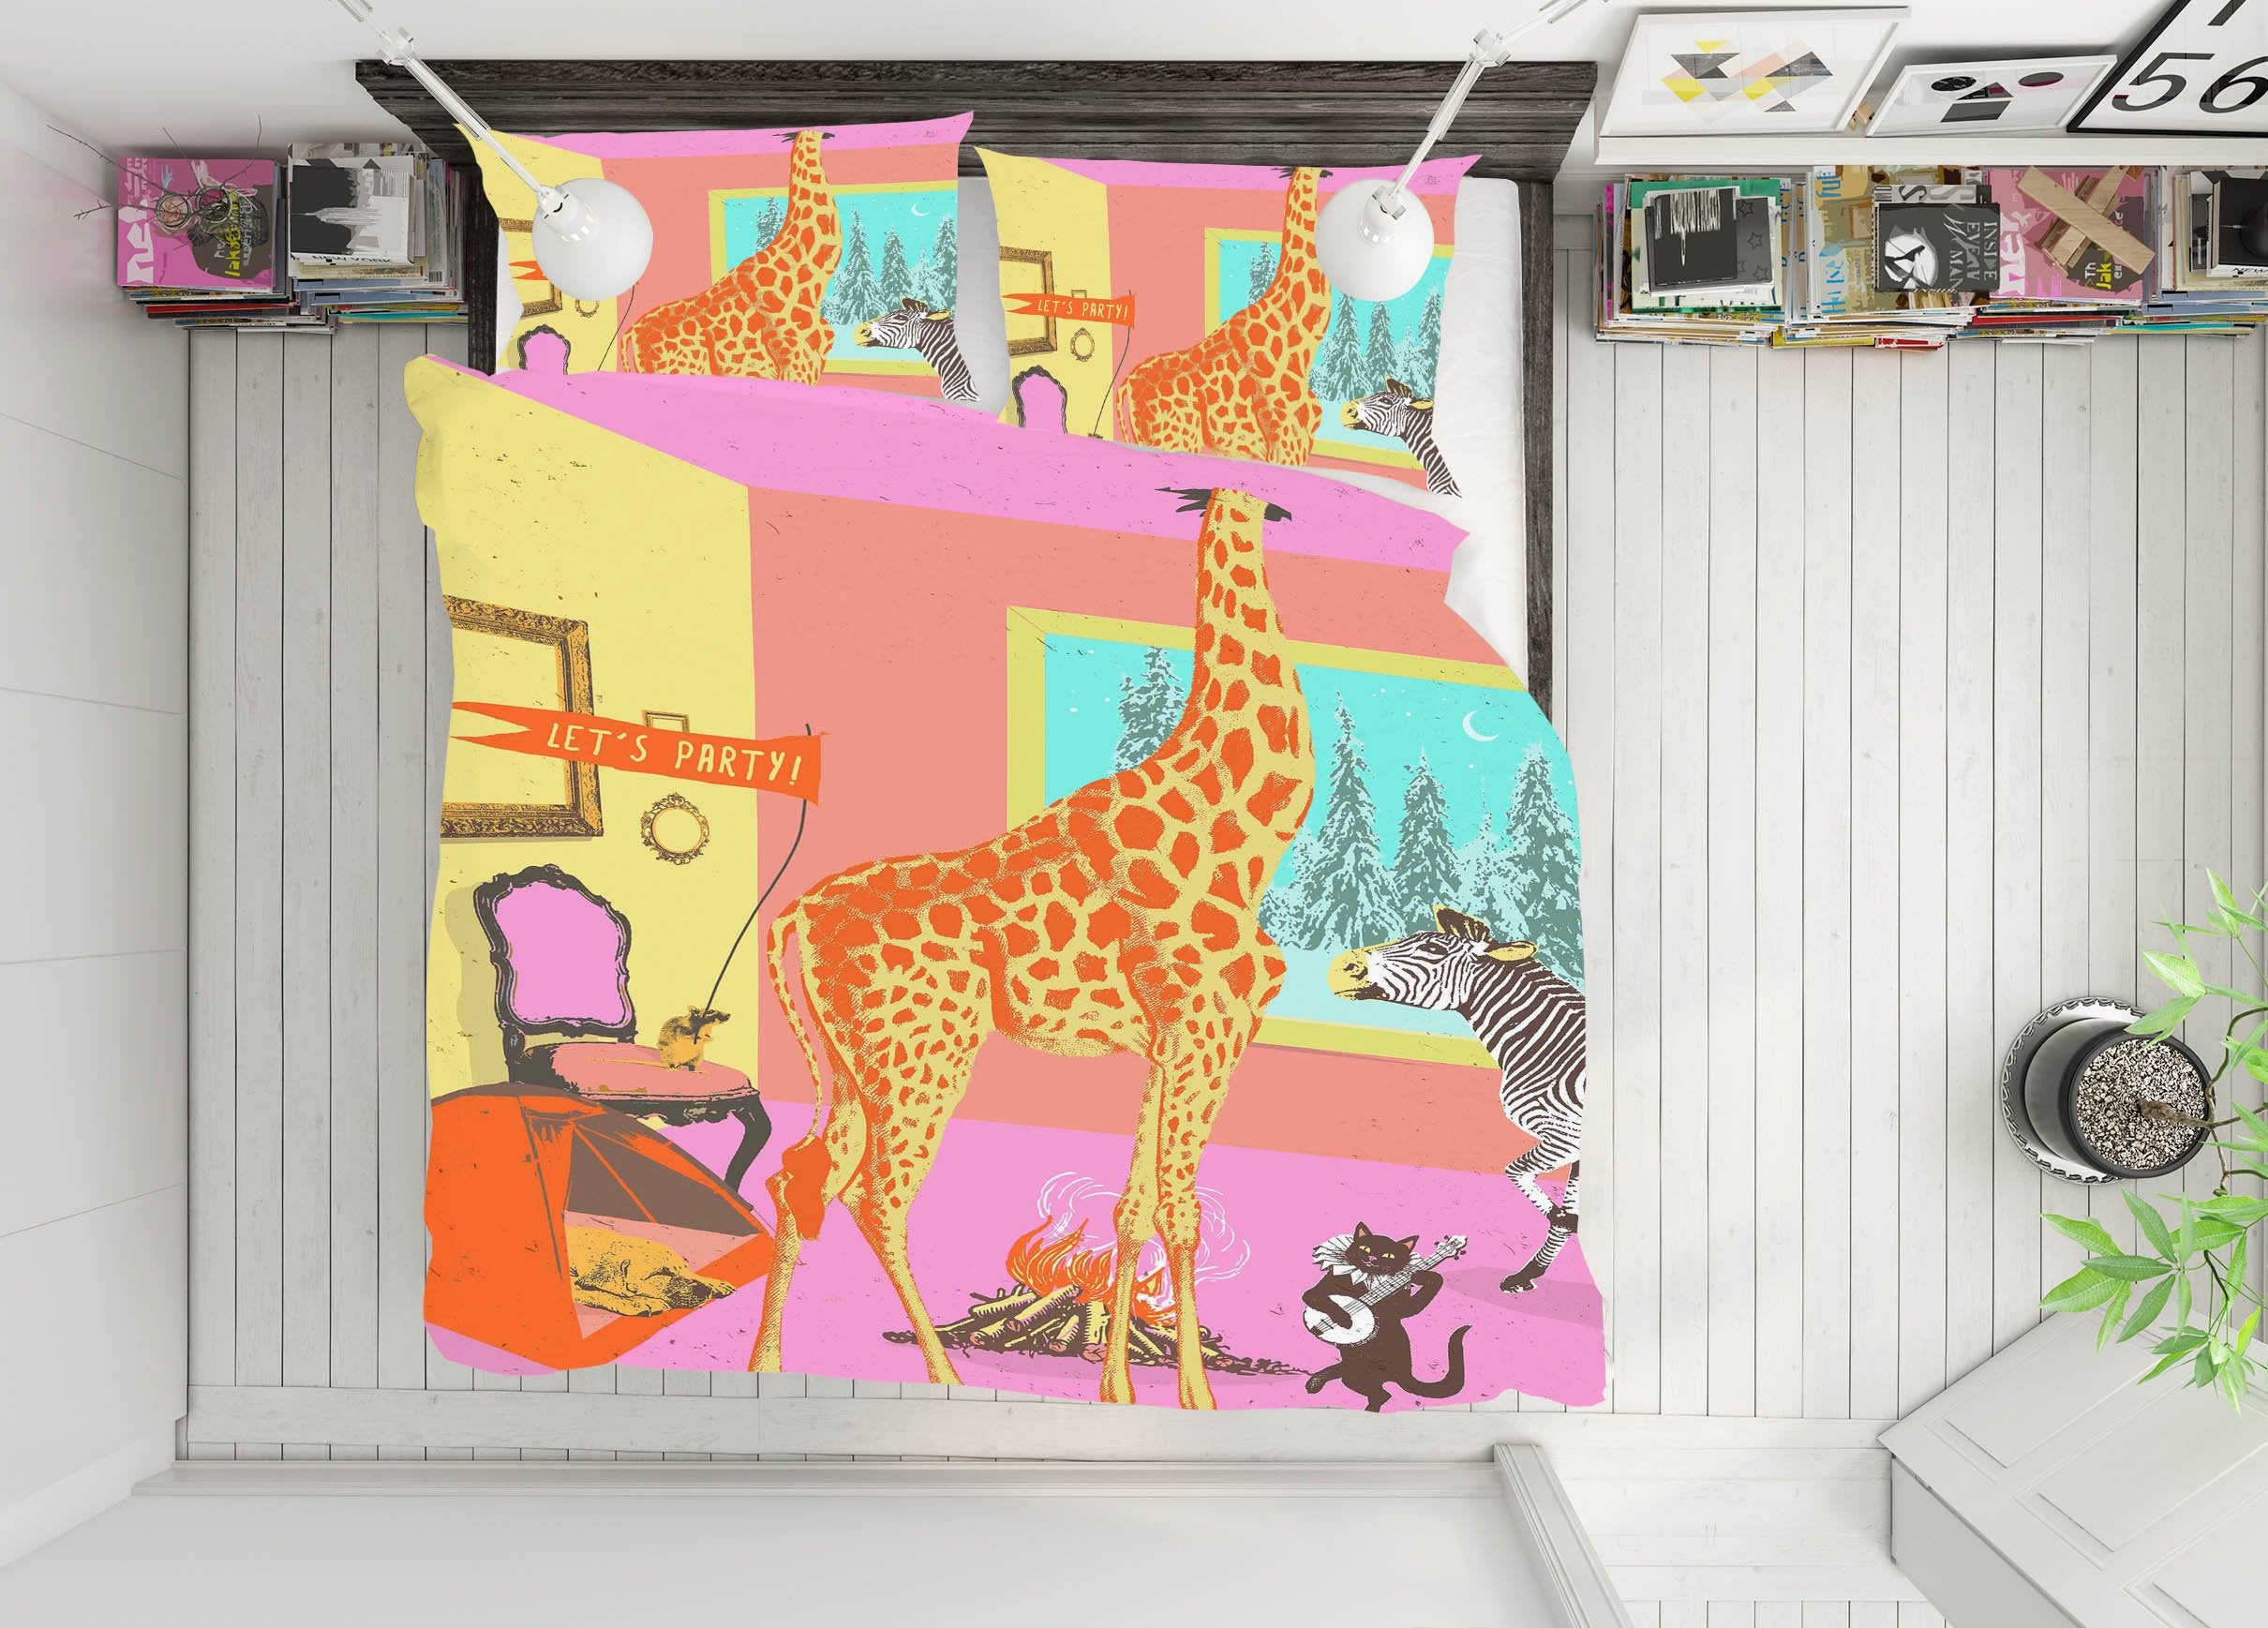 3D Animal Party 2108 Showdeer Bedding Bed Pillowcases Quilt Quiet Covers AJ Creativity Home 